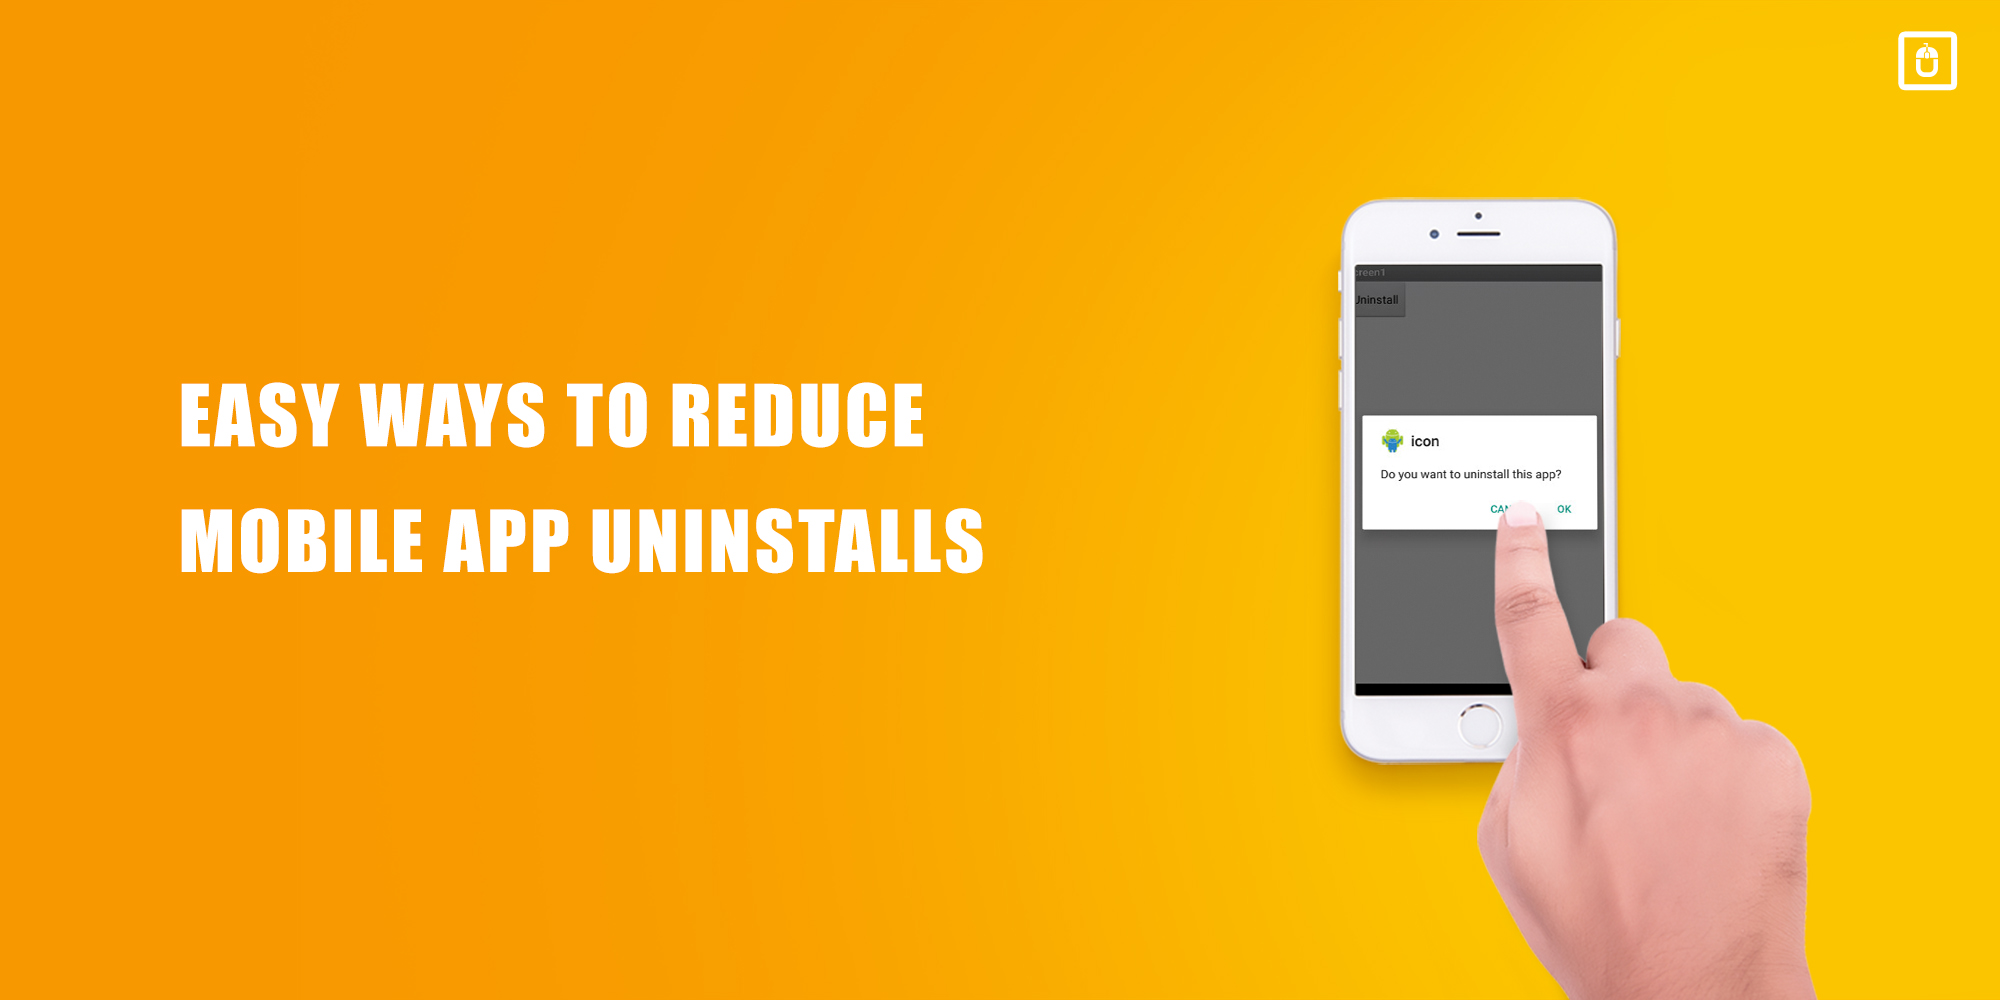 CONSIDER THESE STEPS TO REDUCE MOBILE APP UNINSTALLS (Updated)